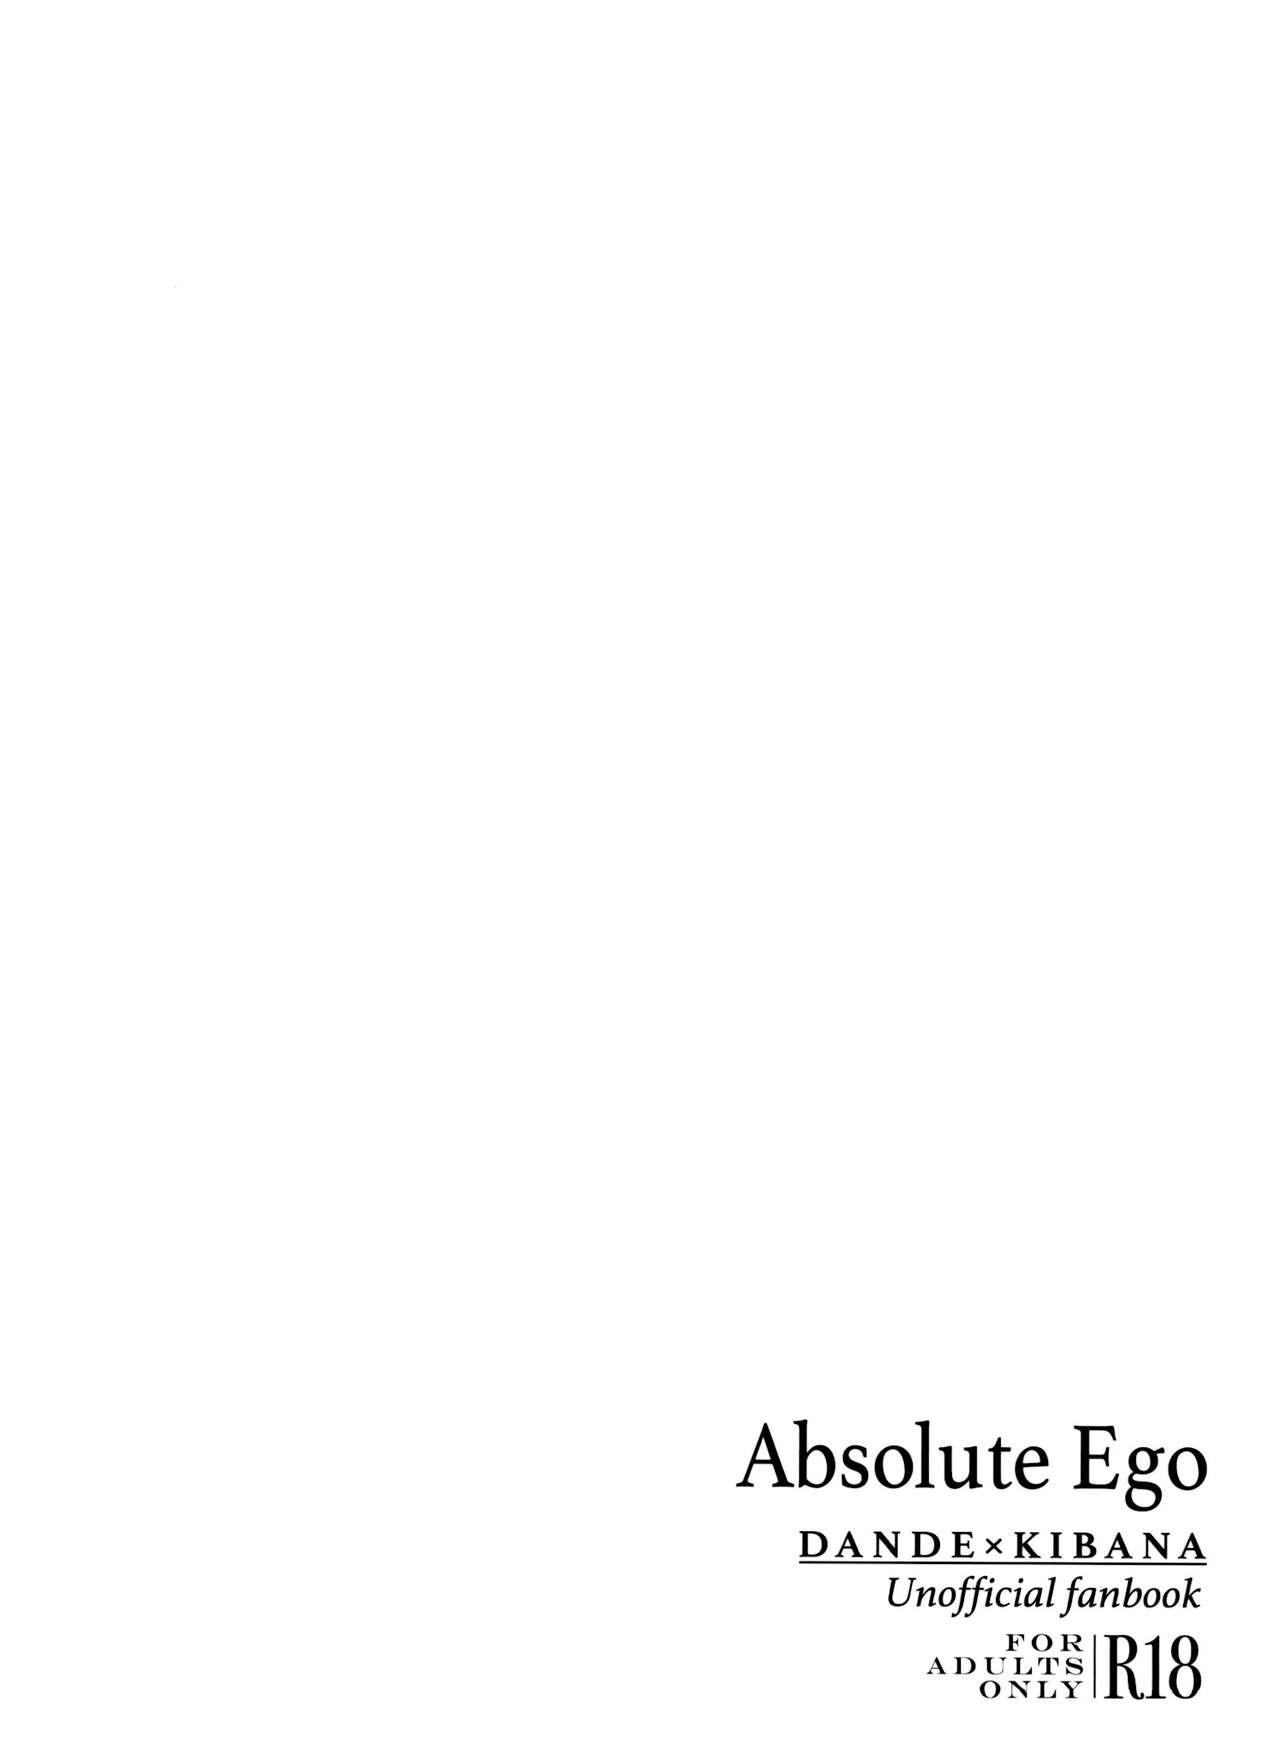 Absolute Ego Matome 29